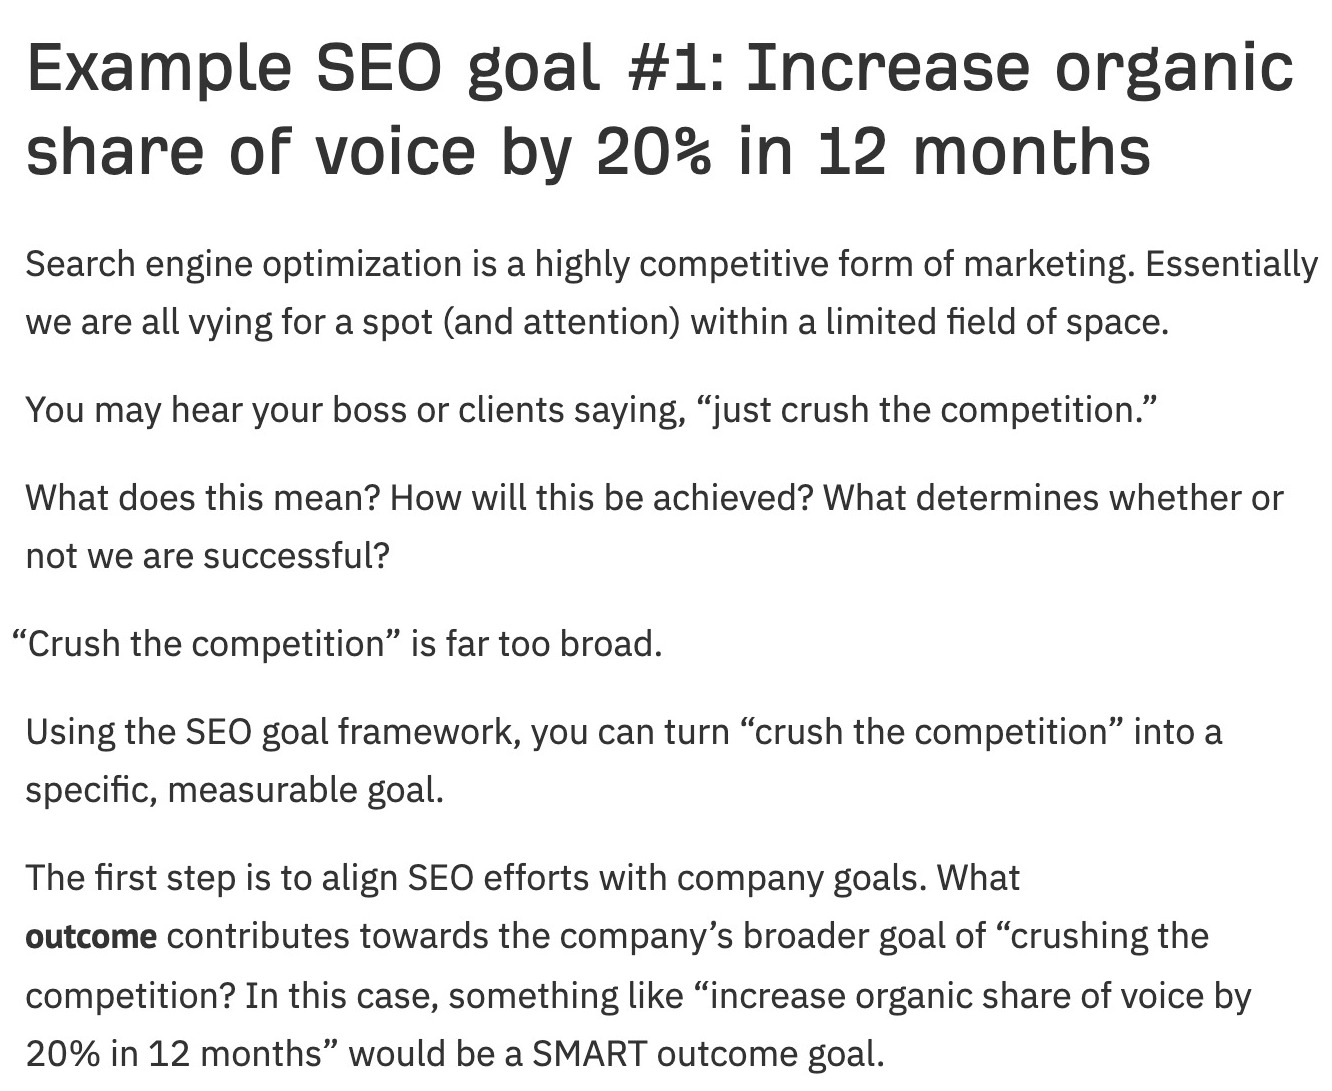 Excerpt of blog post about SEO goals